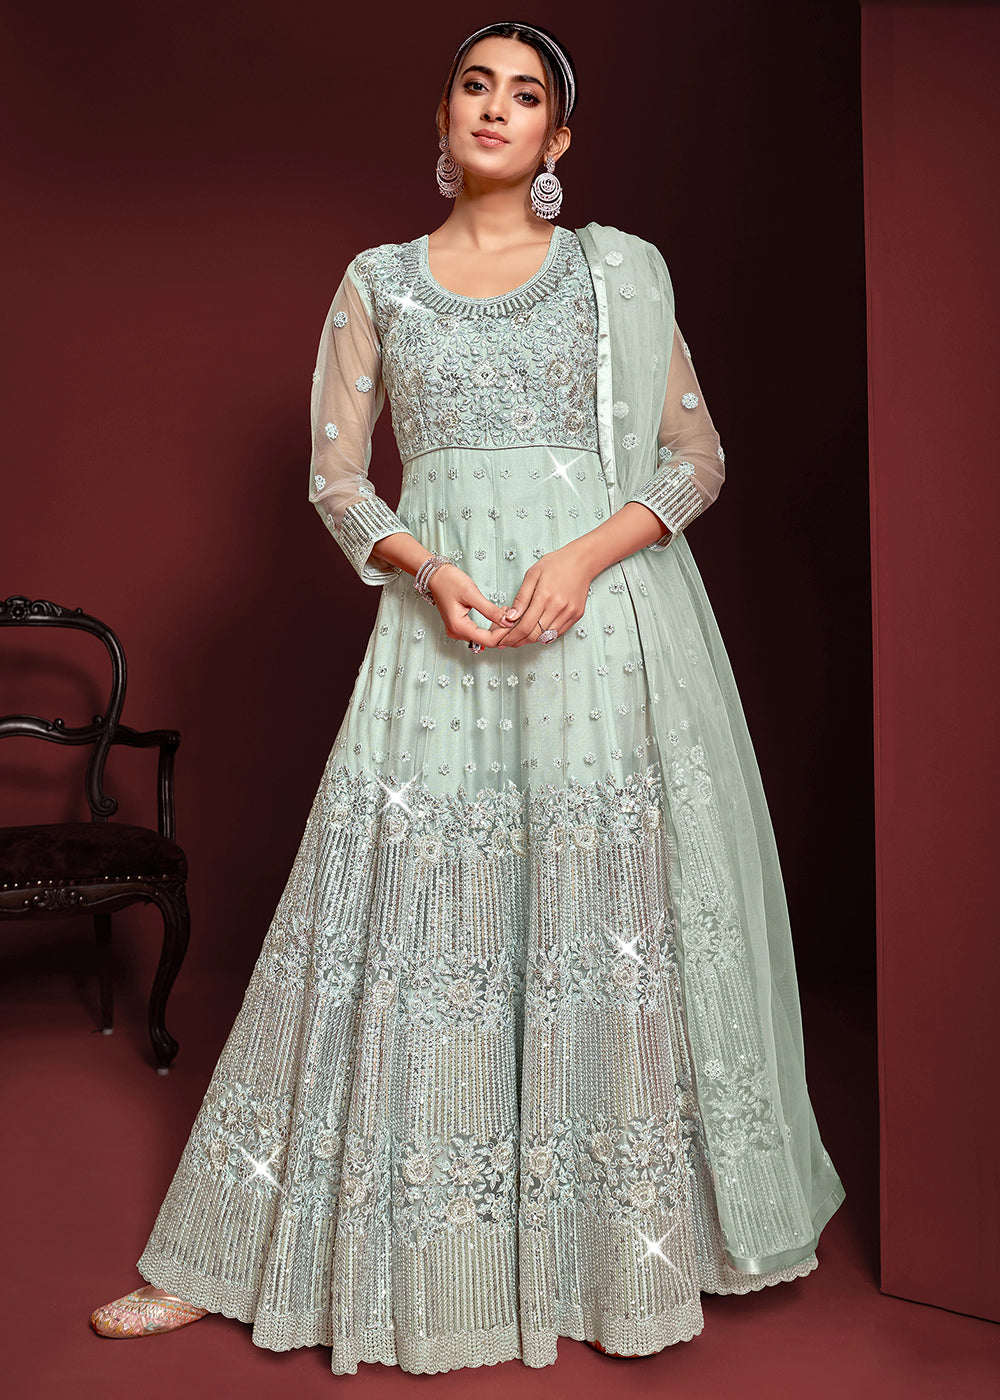 Buy Now Festive Party Style Light Blue Embroidered Net Anarkali Gown Online in USA, UK, Australia, New Zealand, Canada, Italy & Worldwide at Empress Clothing.